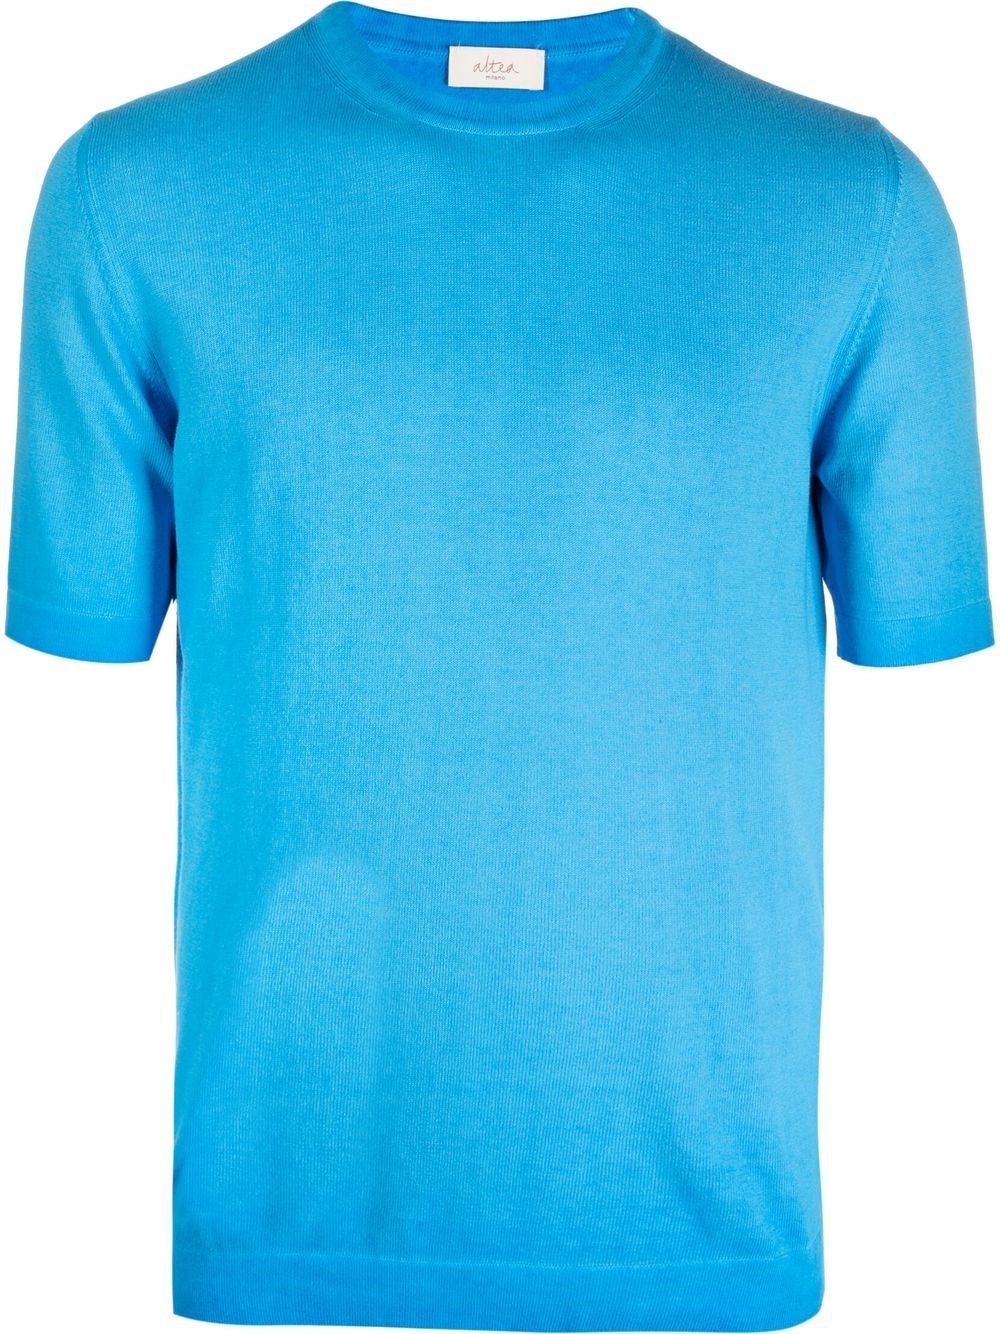 Altea T-shirt In Turquoise